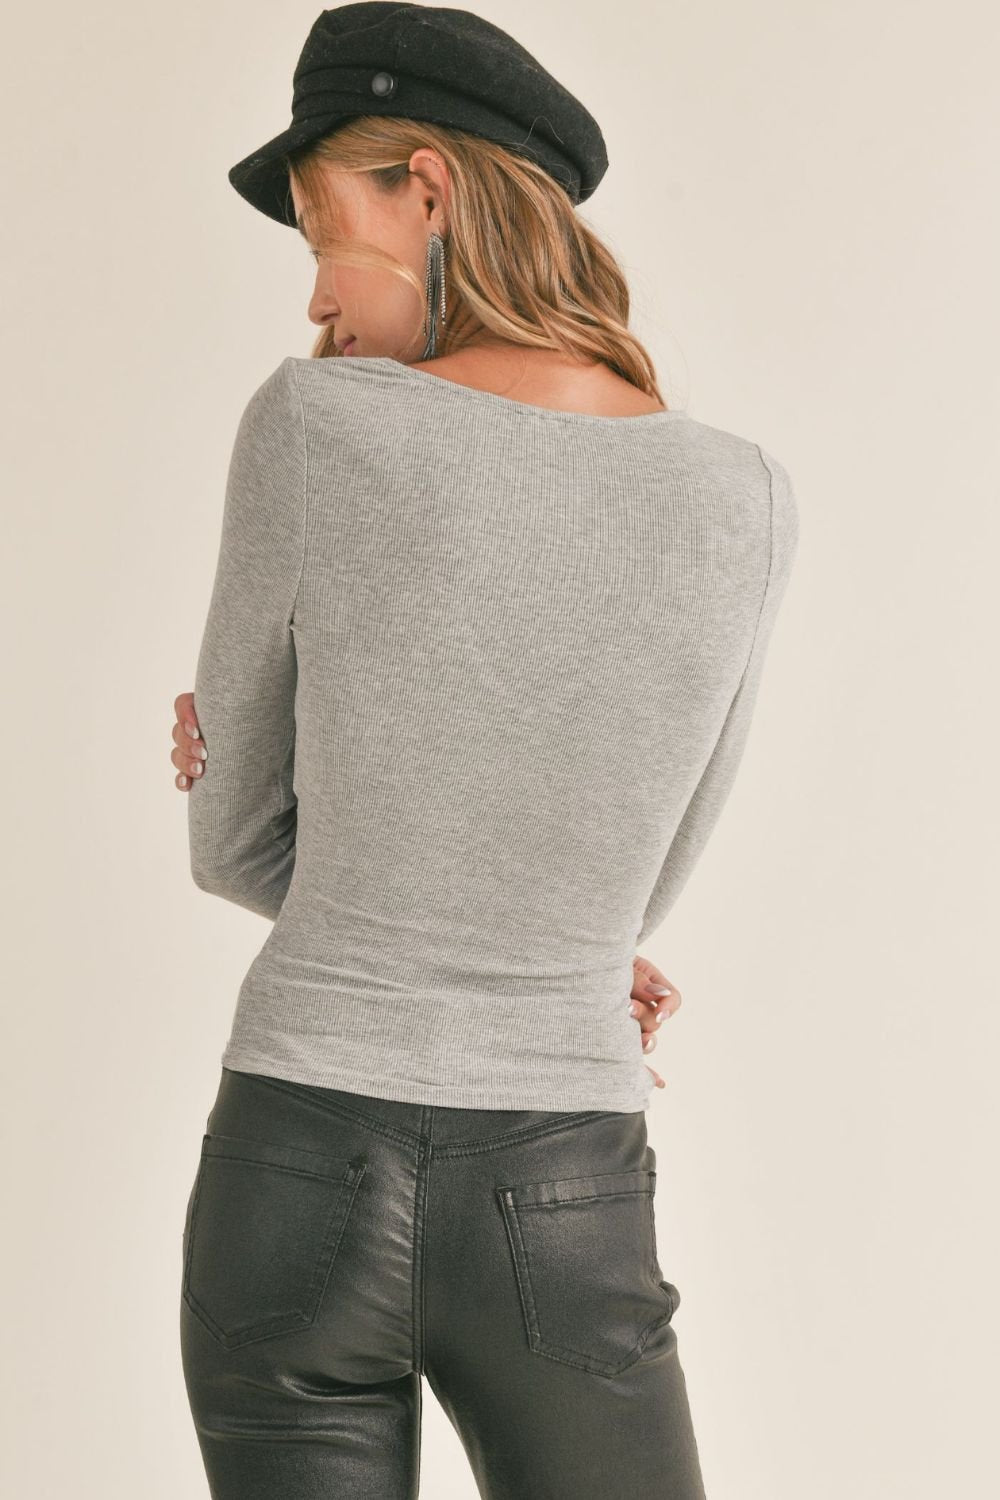 Heather Grey Knit Ribbed Top